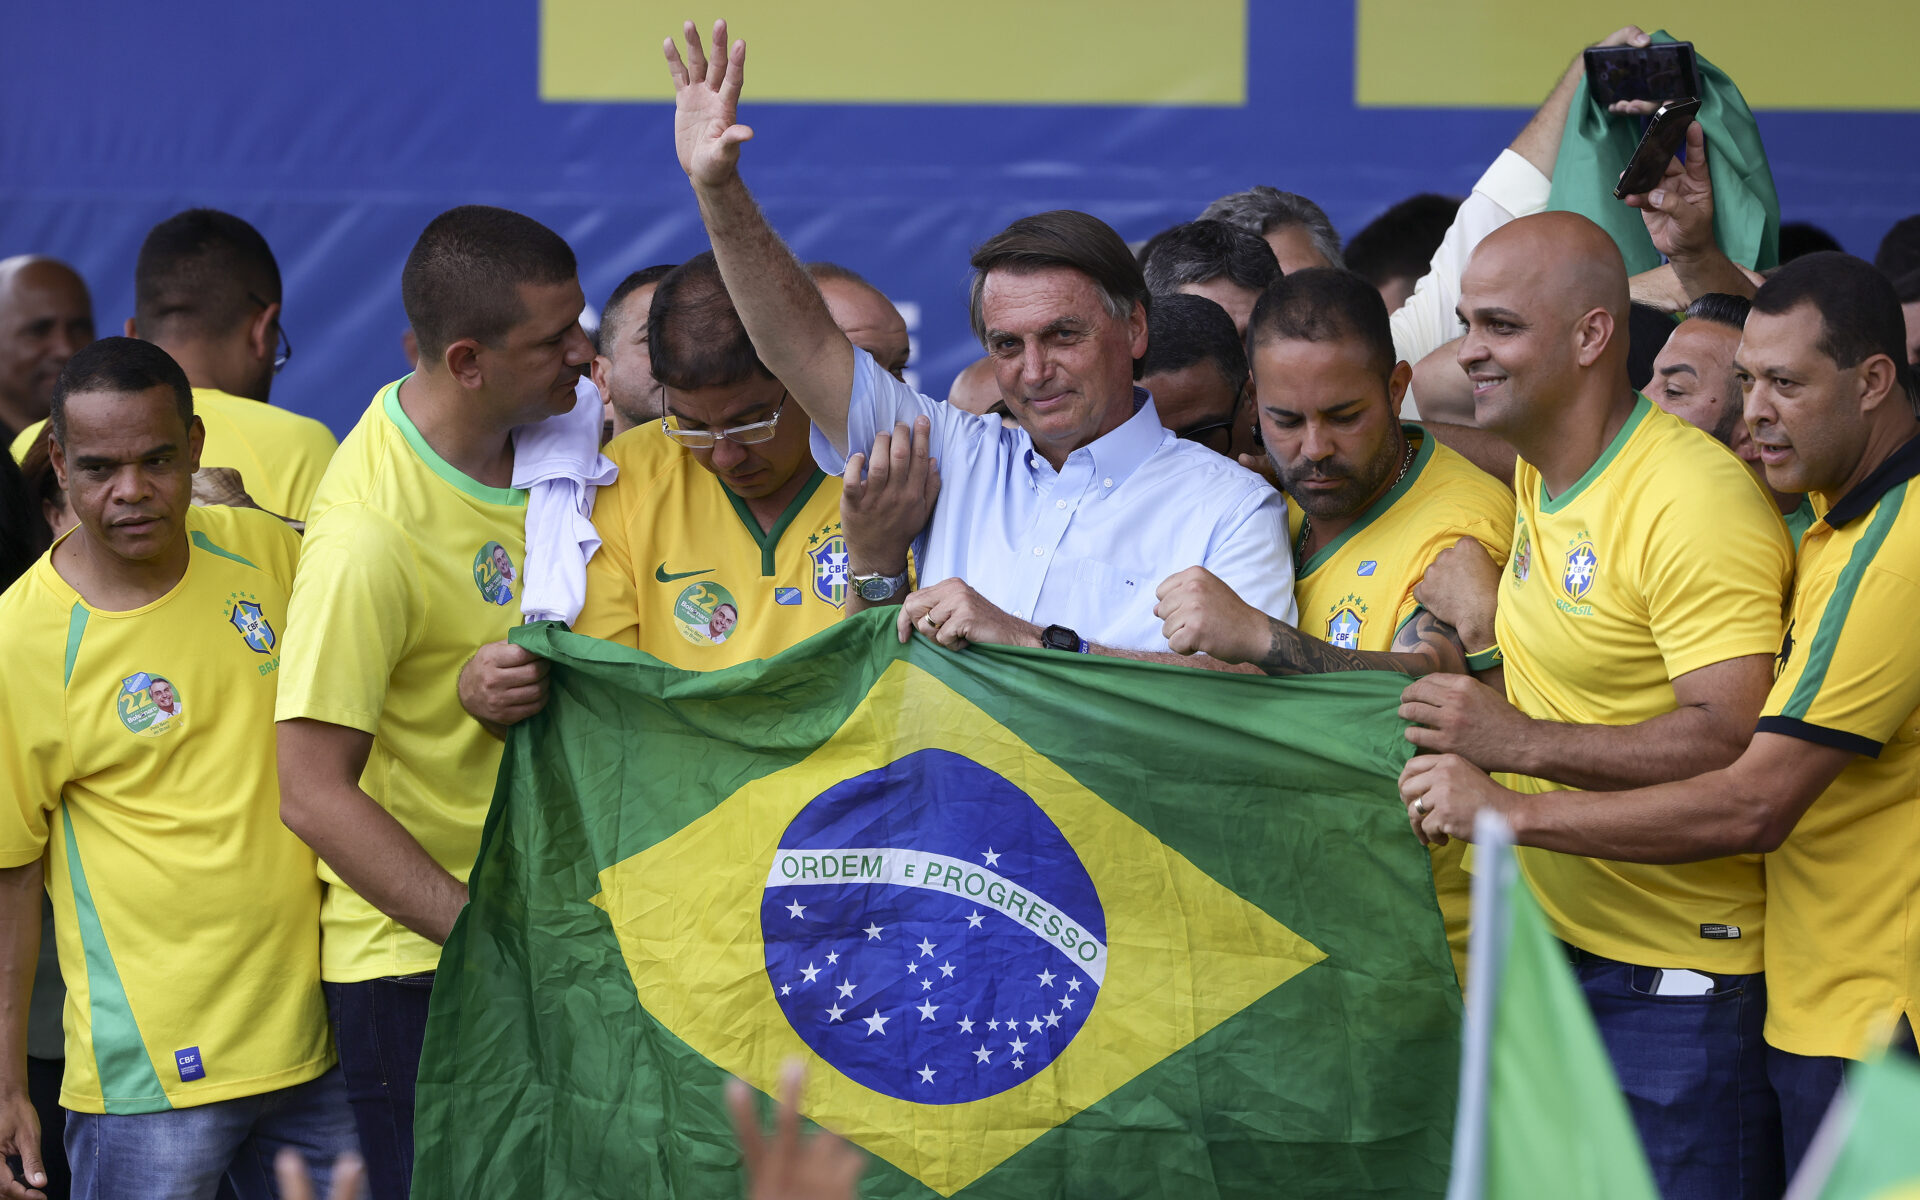 SAO GONCALO, BRAZIL - OCTOBER 18: President of Brazil and presidential candidate Jair Bolsonaro (C) greets supporters during a rally organized by Liberal Party as part of the campaign ahead of presidential run-off on October 18, 2022 in Sao Goncalo, Brazil. (Photo by Buda Mendes/Getty Images)